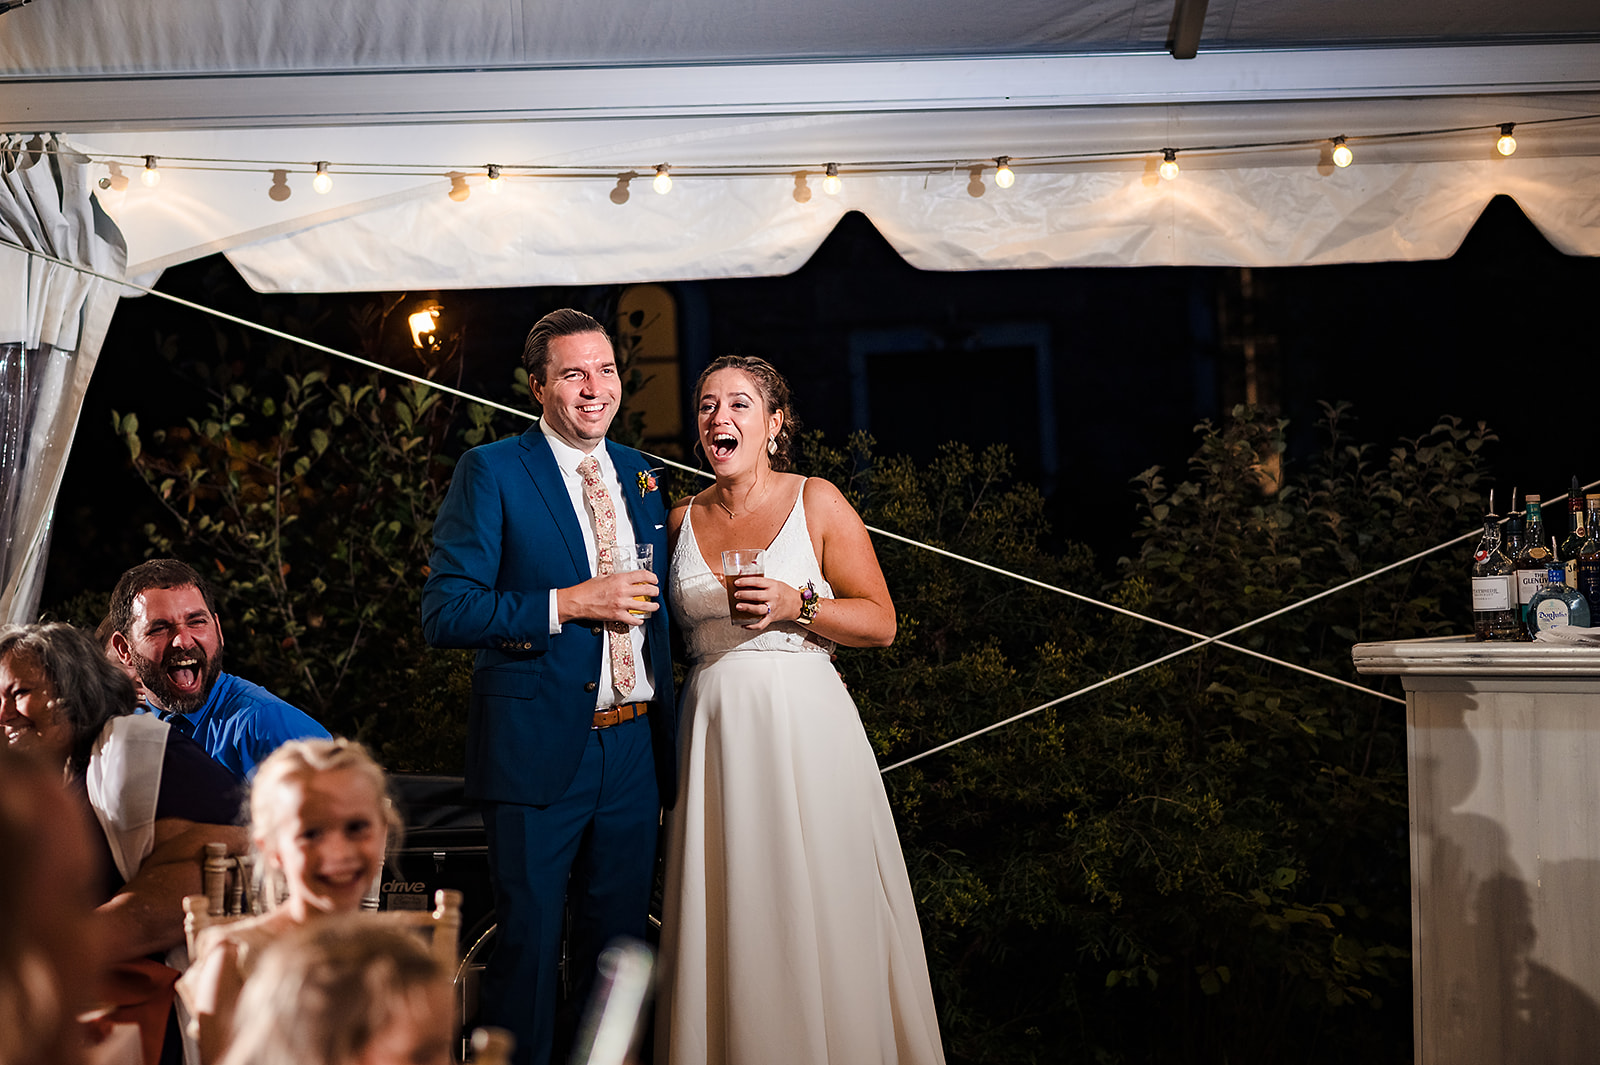 Bride and groom reacting to toasts given during reception